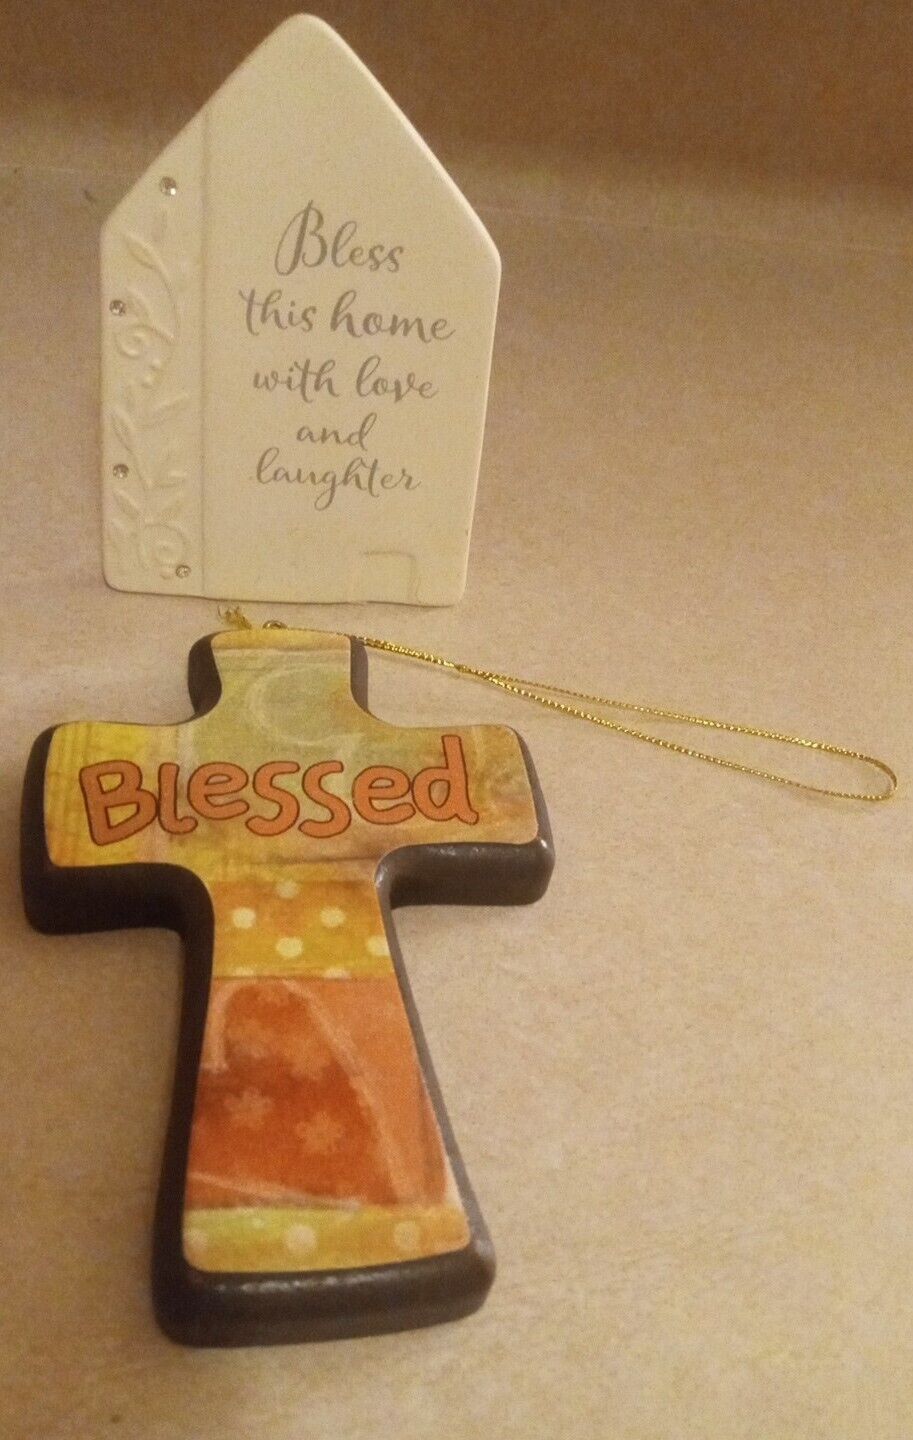 Lot of 2 Religious House Blessings Prayer Signs Plaques Christianity NEW w/TAGS 